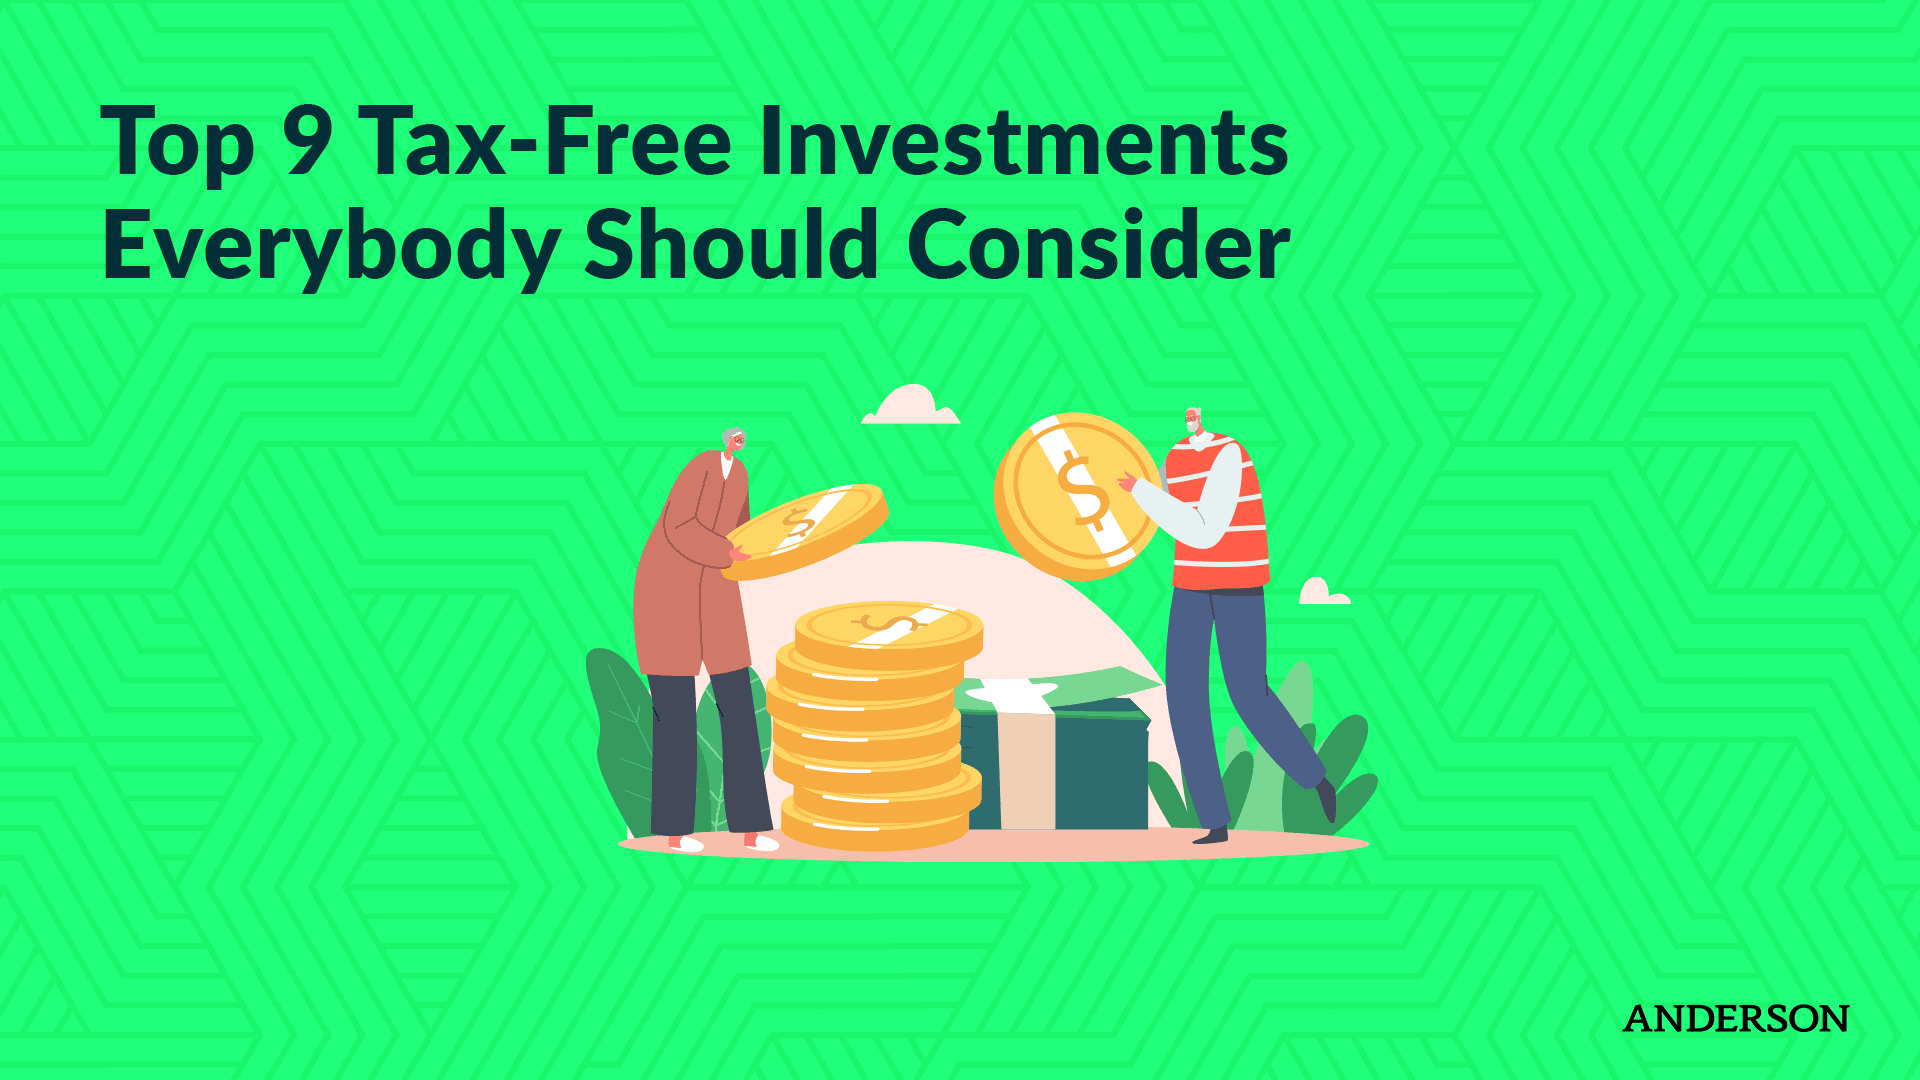 maler Gylden Se tilbage Here are the Top 9 Tax-Free Investments Everybody Should Consider